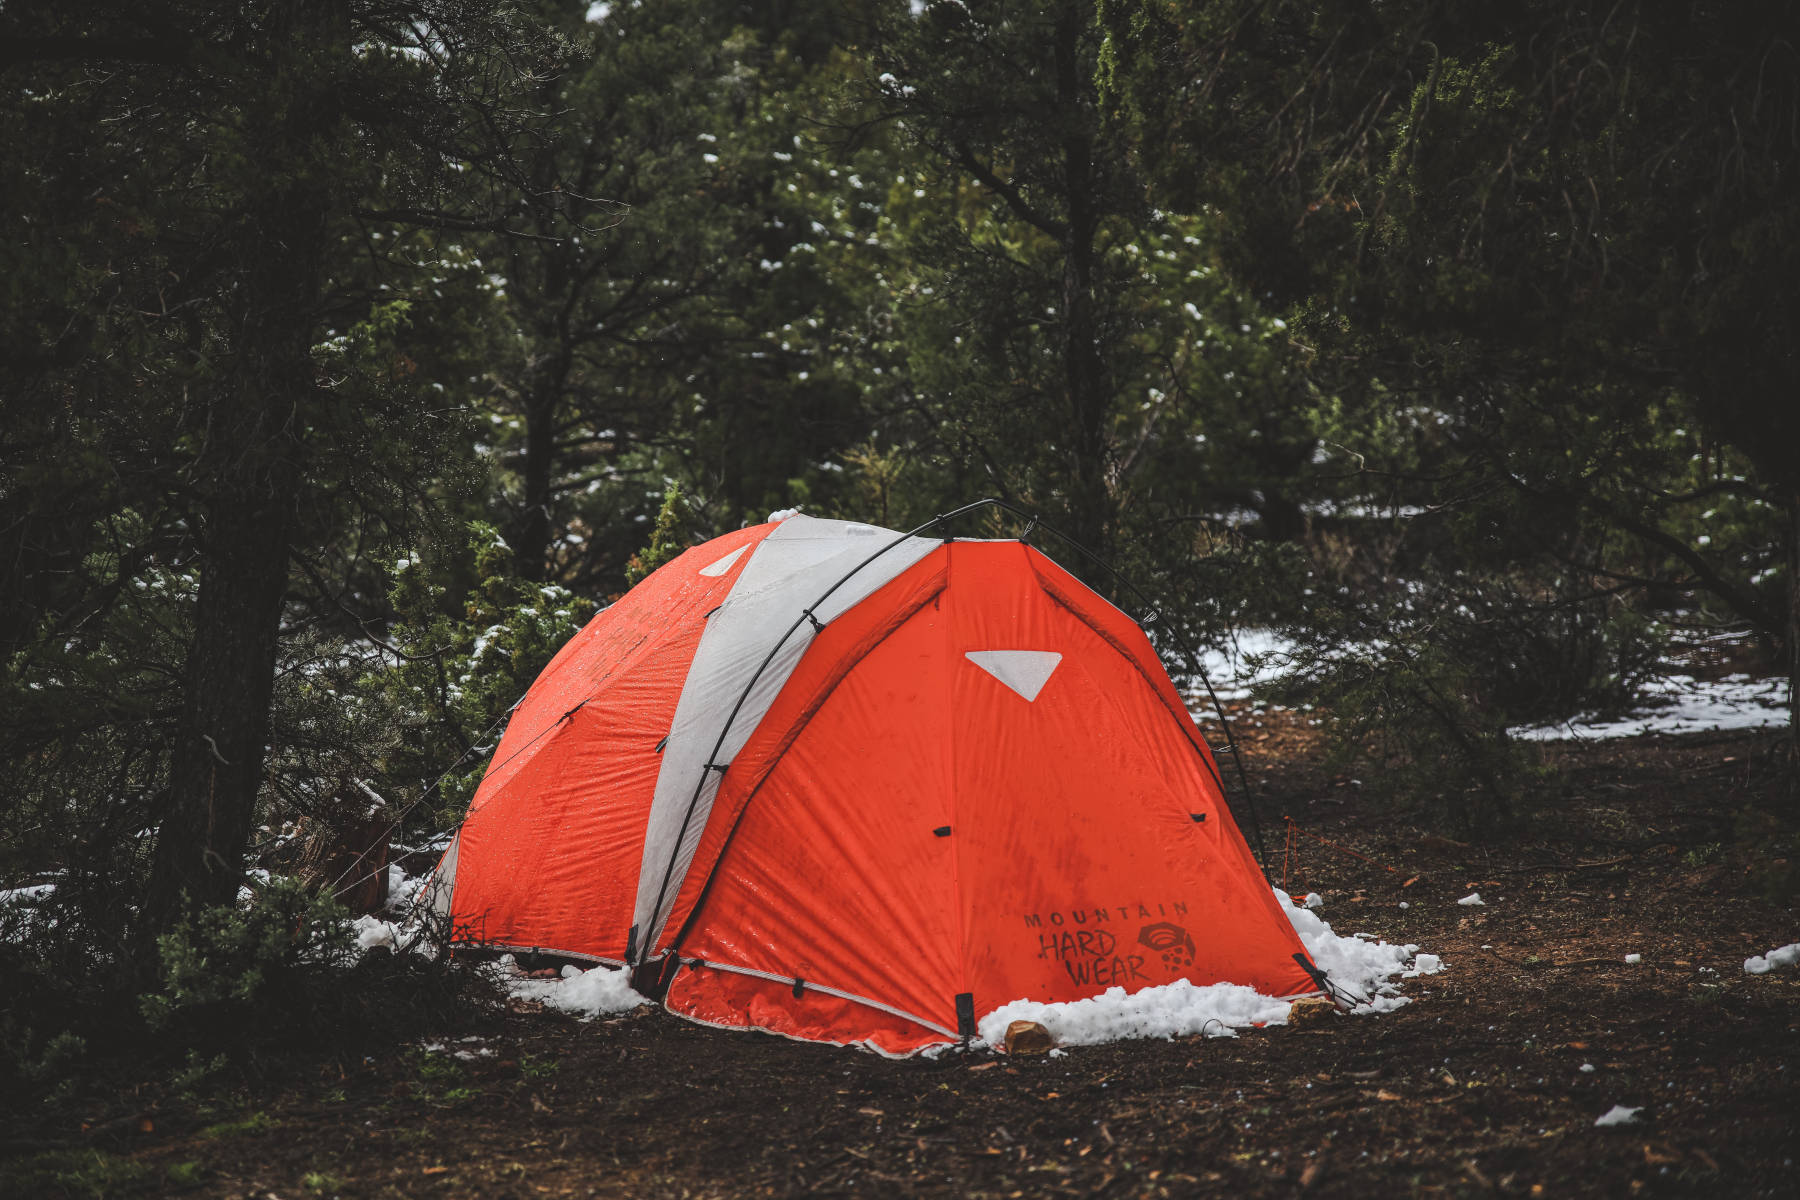 Camping in the winter and snow with a 4 season tent - HelloTrail.com